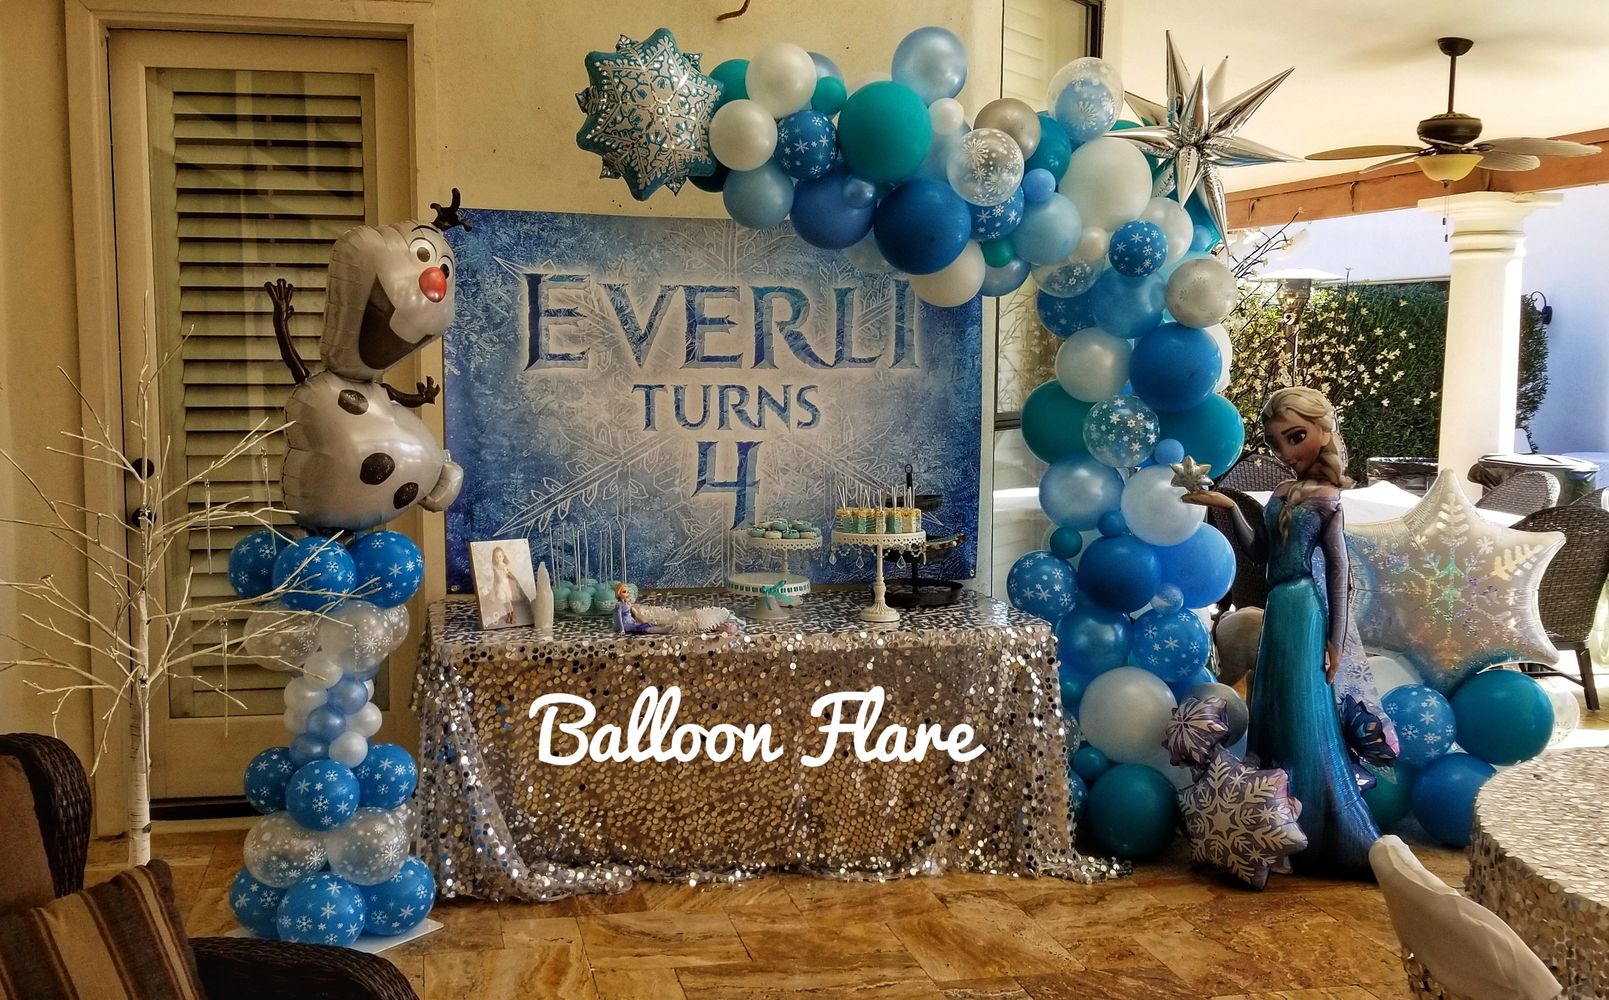 alt="For the very best balloon decor or balloon bouquet deliveries choose Balloon Flare"